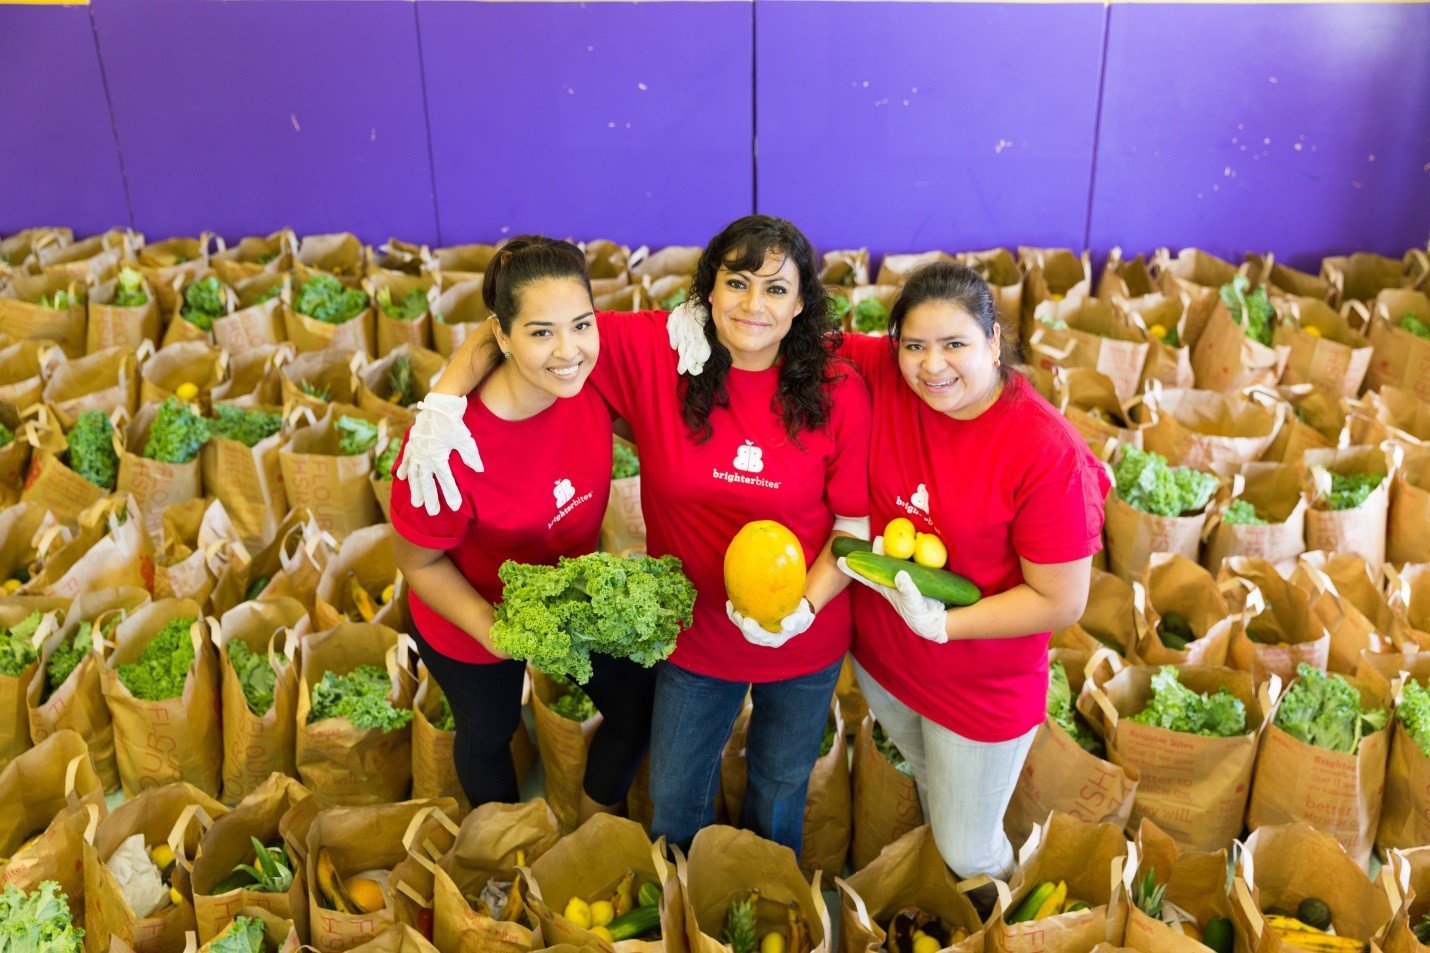 Three members posing in center of large grocery bags filled with vegetables.